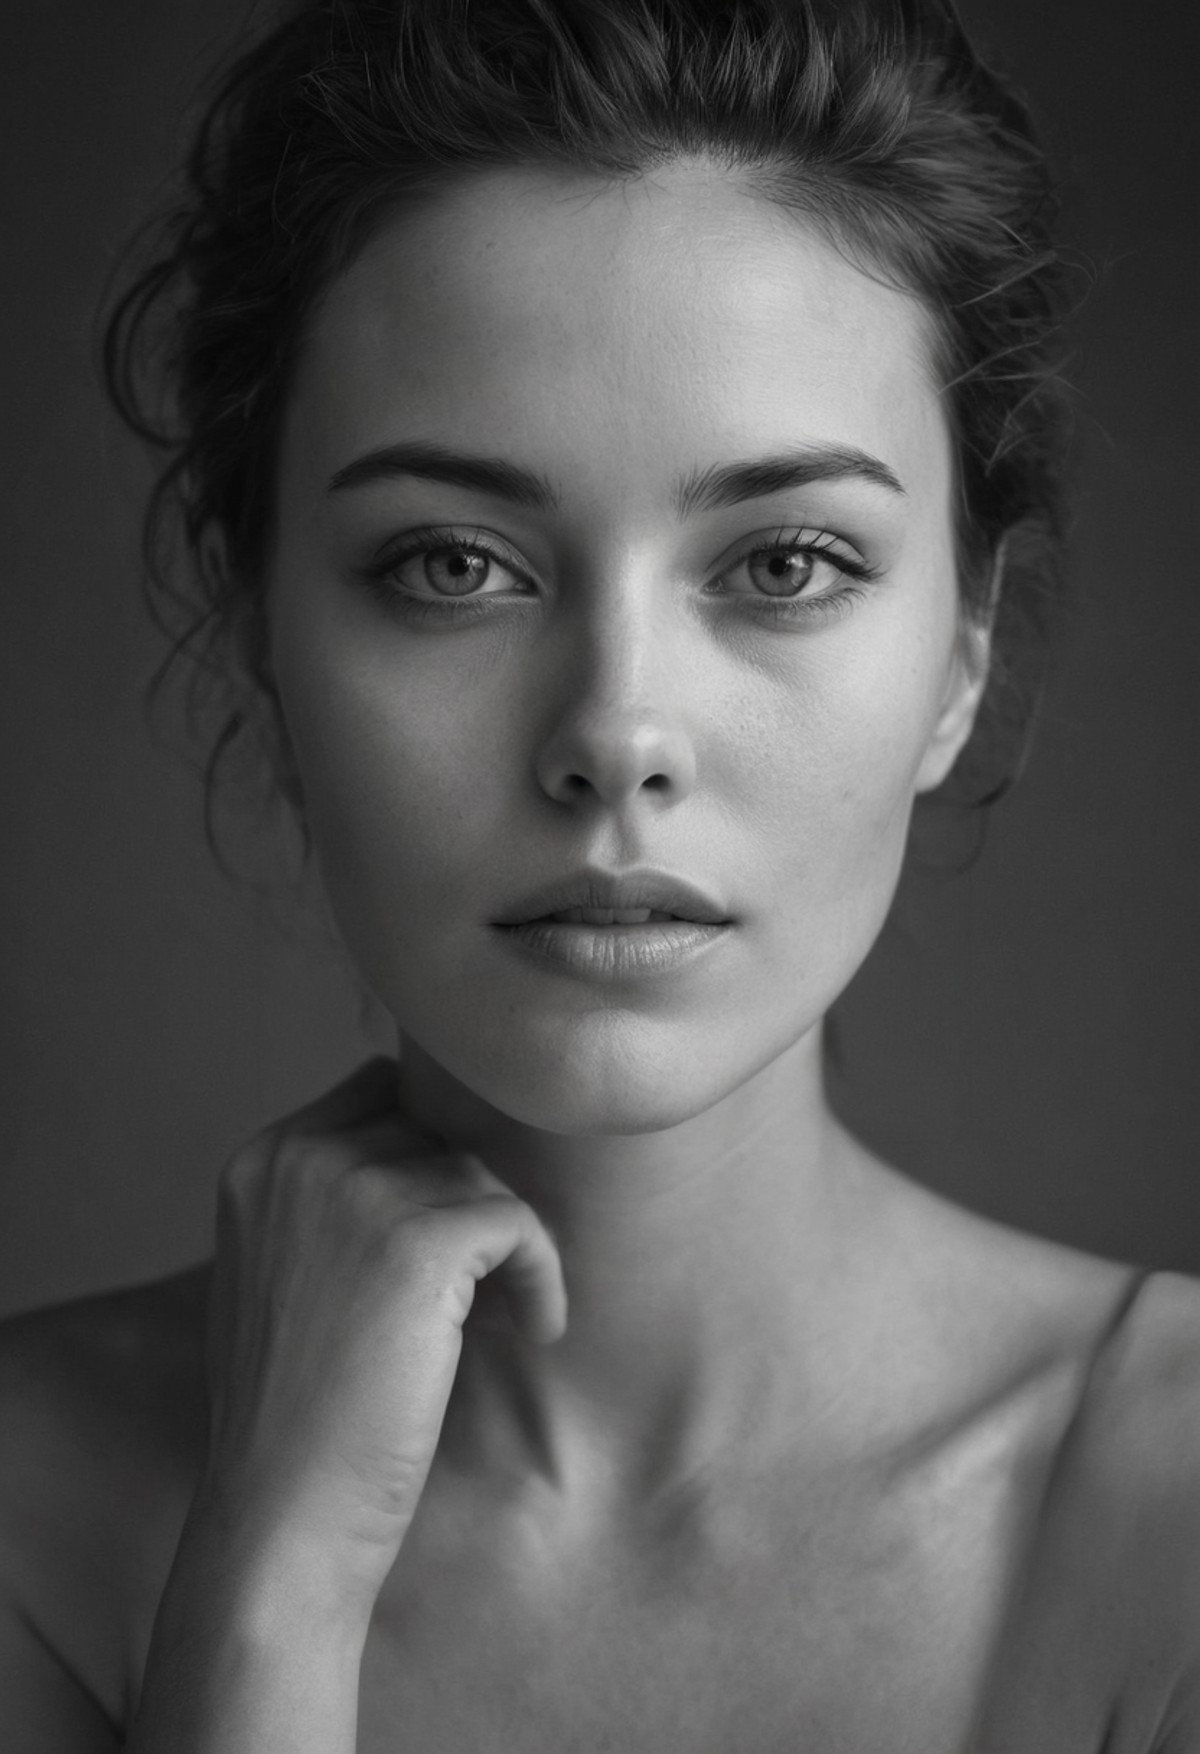 A dramatic black-and-white portrait of a woman gazing intently into the camera, inspired by Richard Avedon's style. High c...